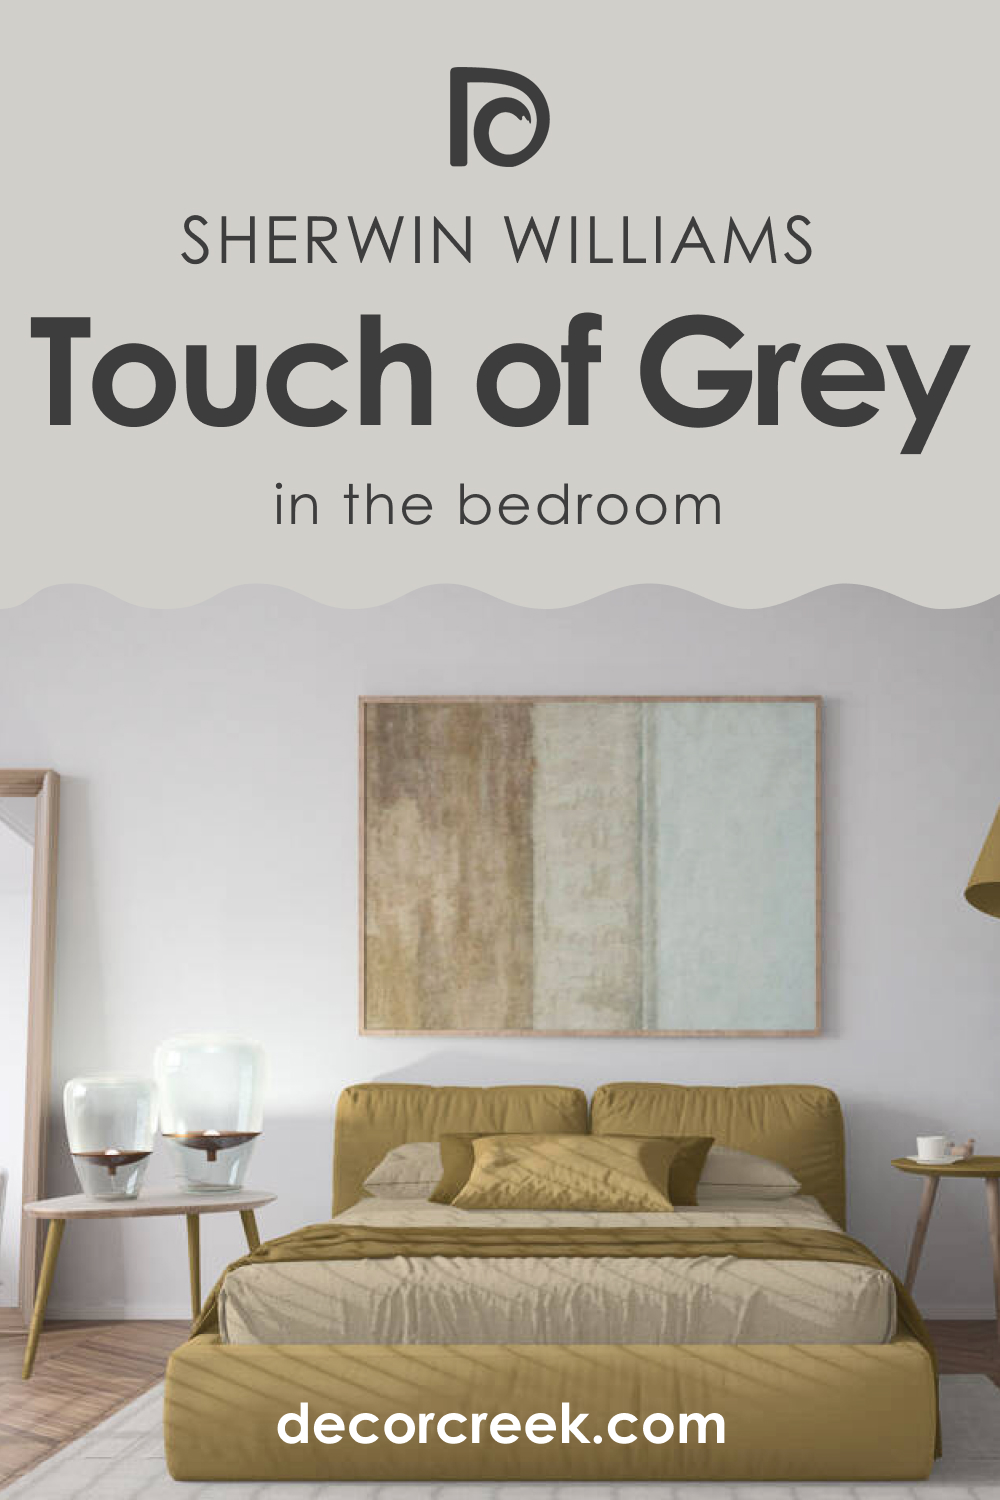 How to Use SW 9549 Touch of Grey in the Bedroom?